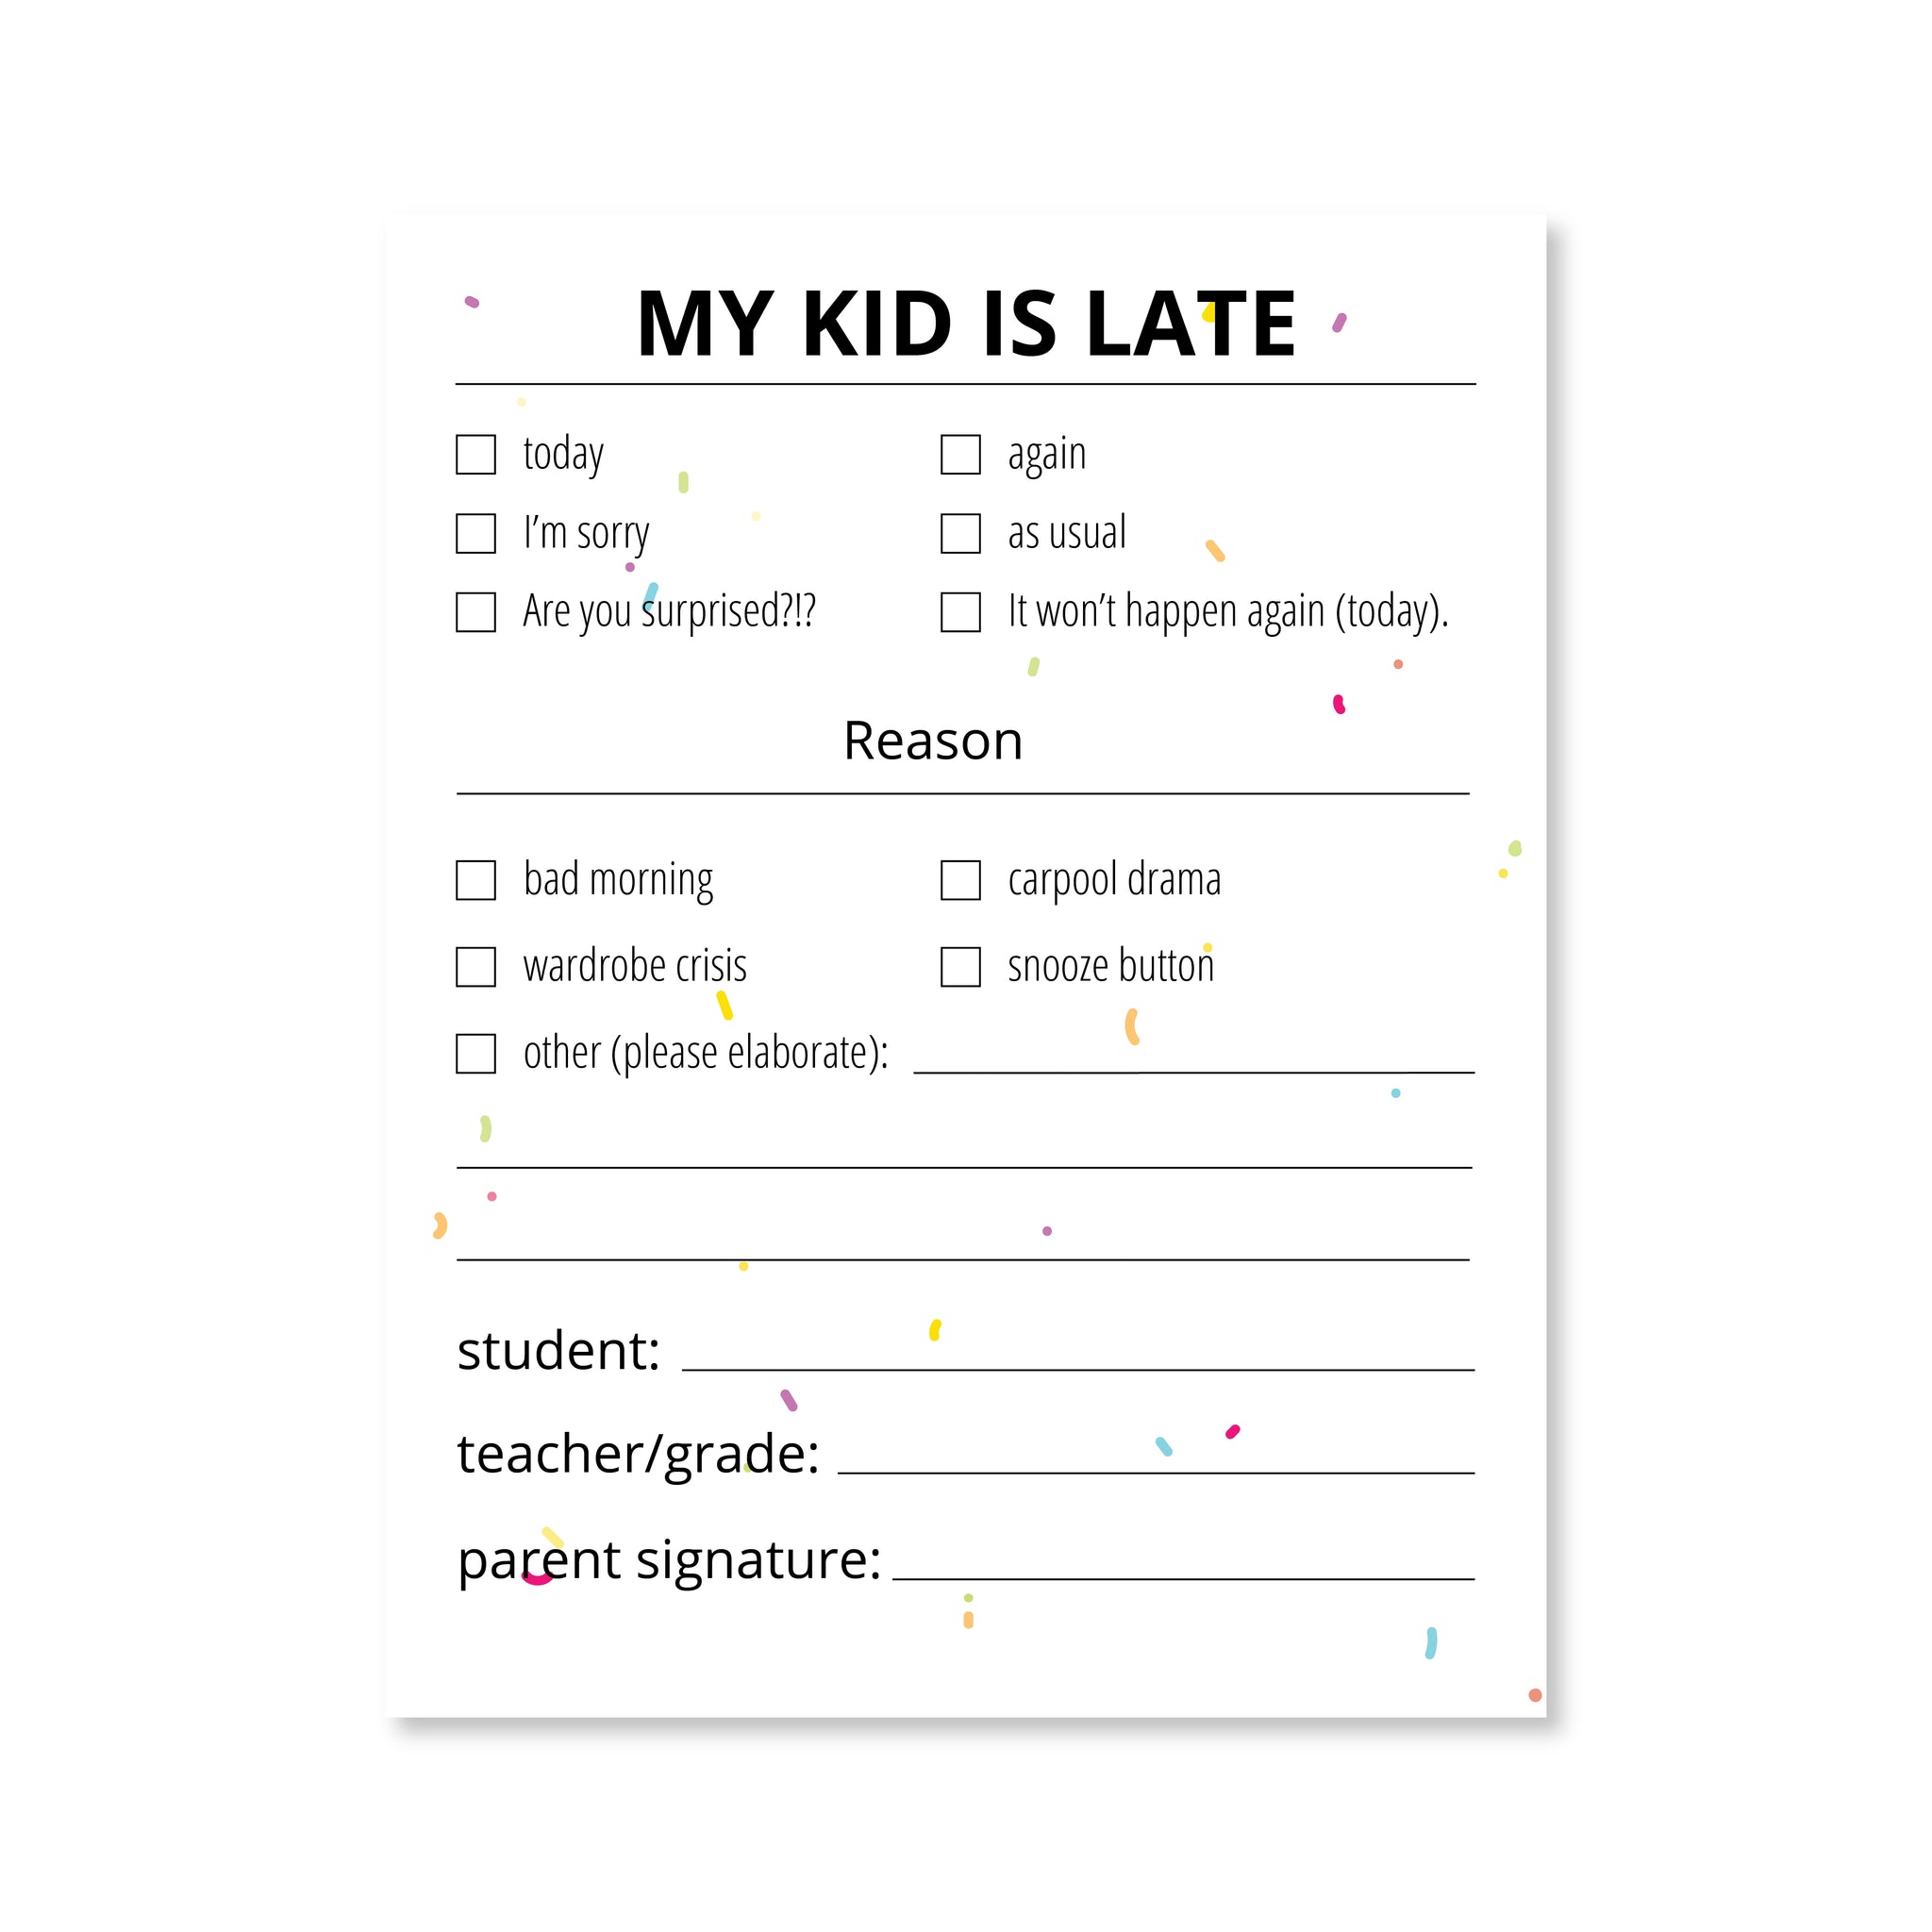 My Kid is Late Notepad